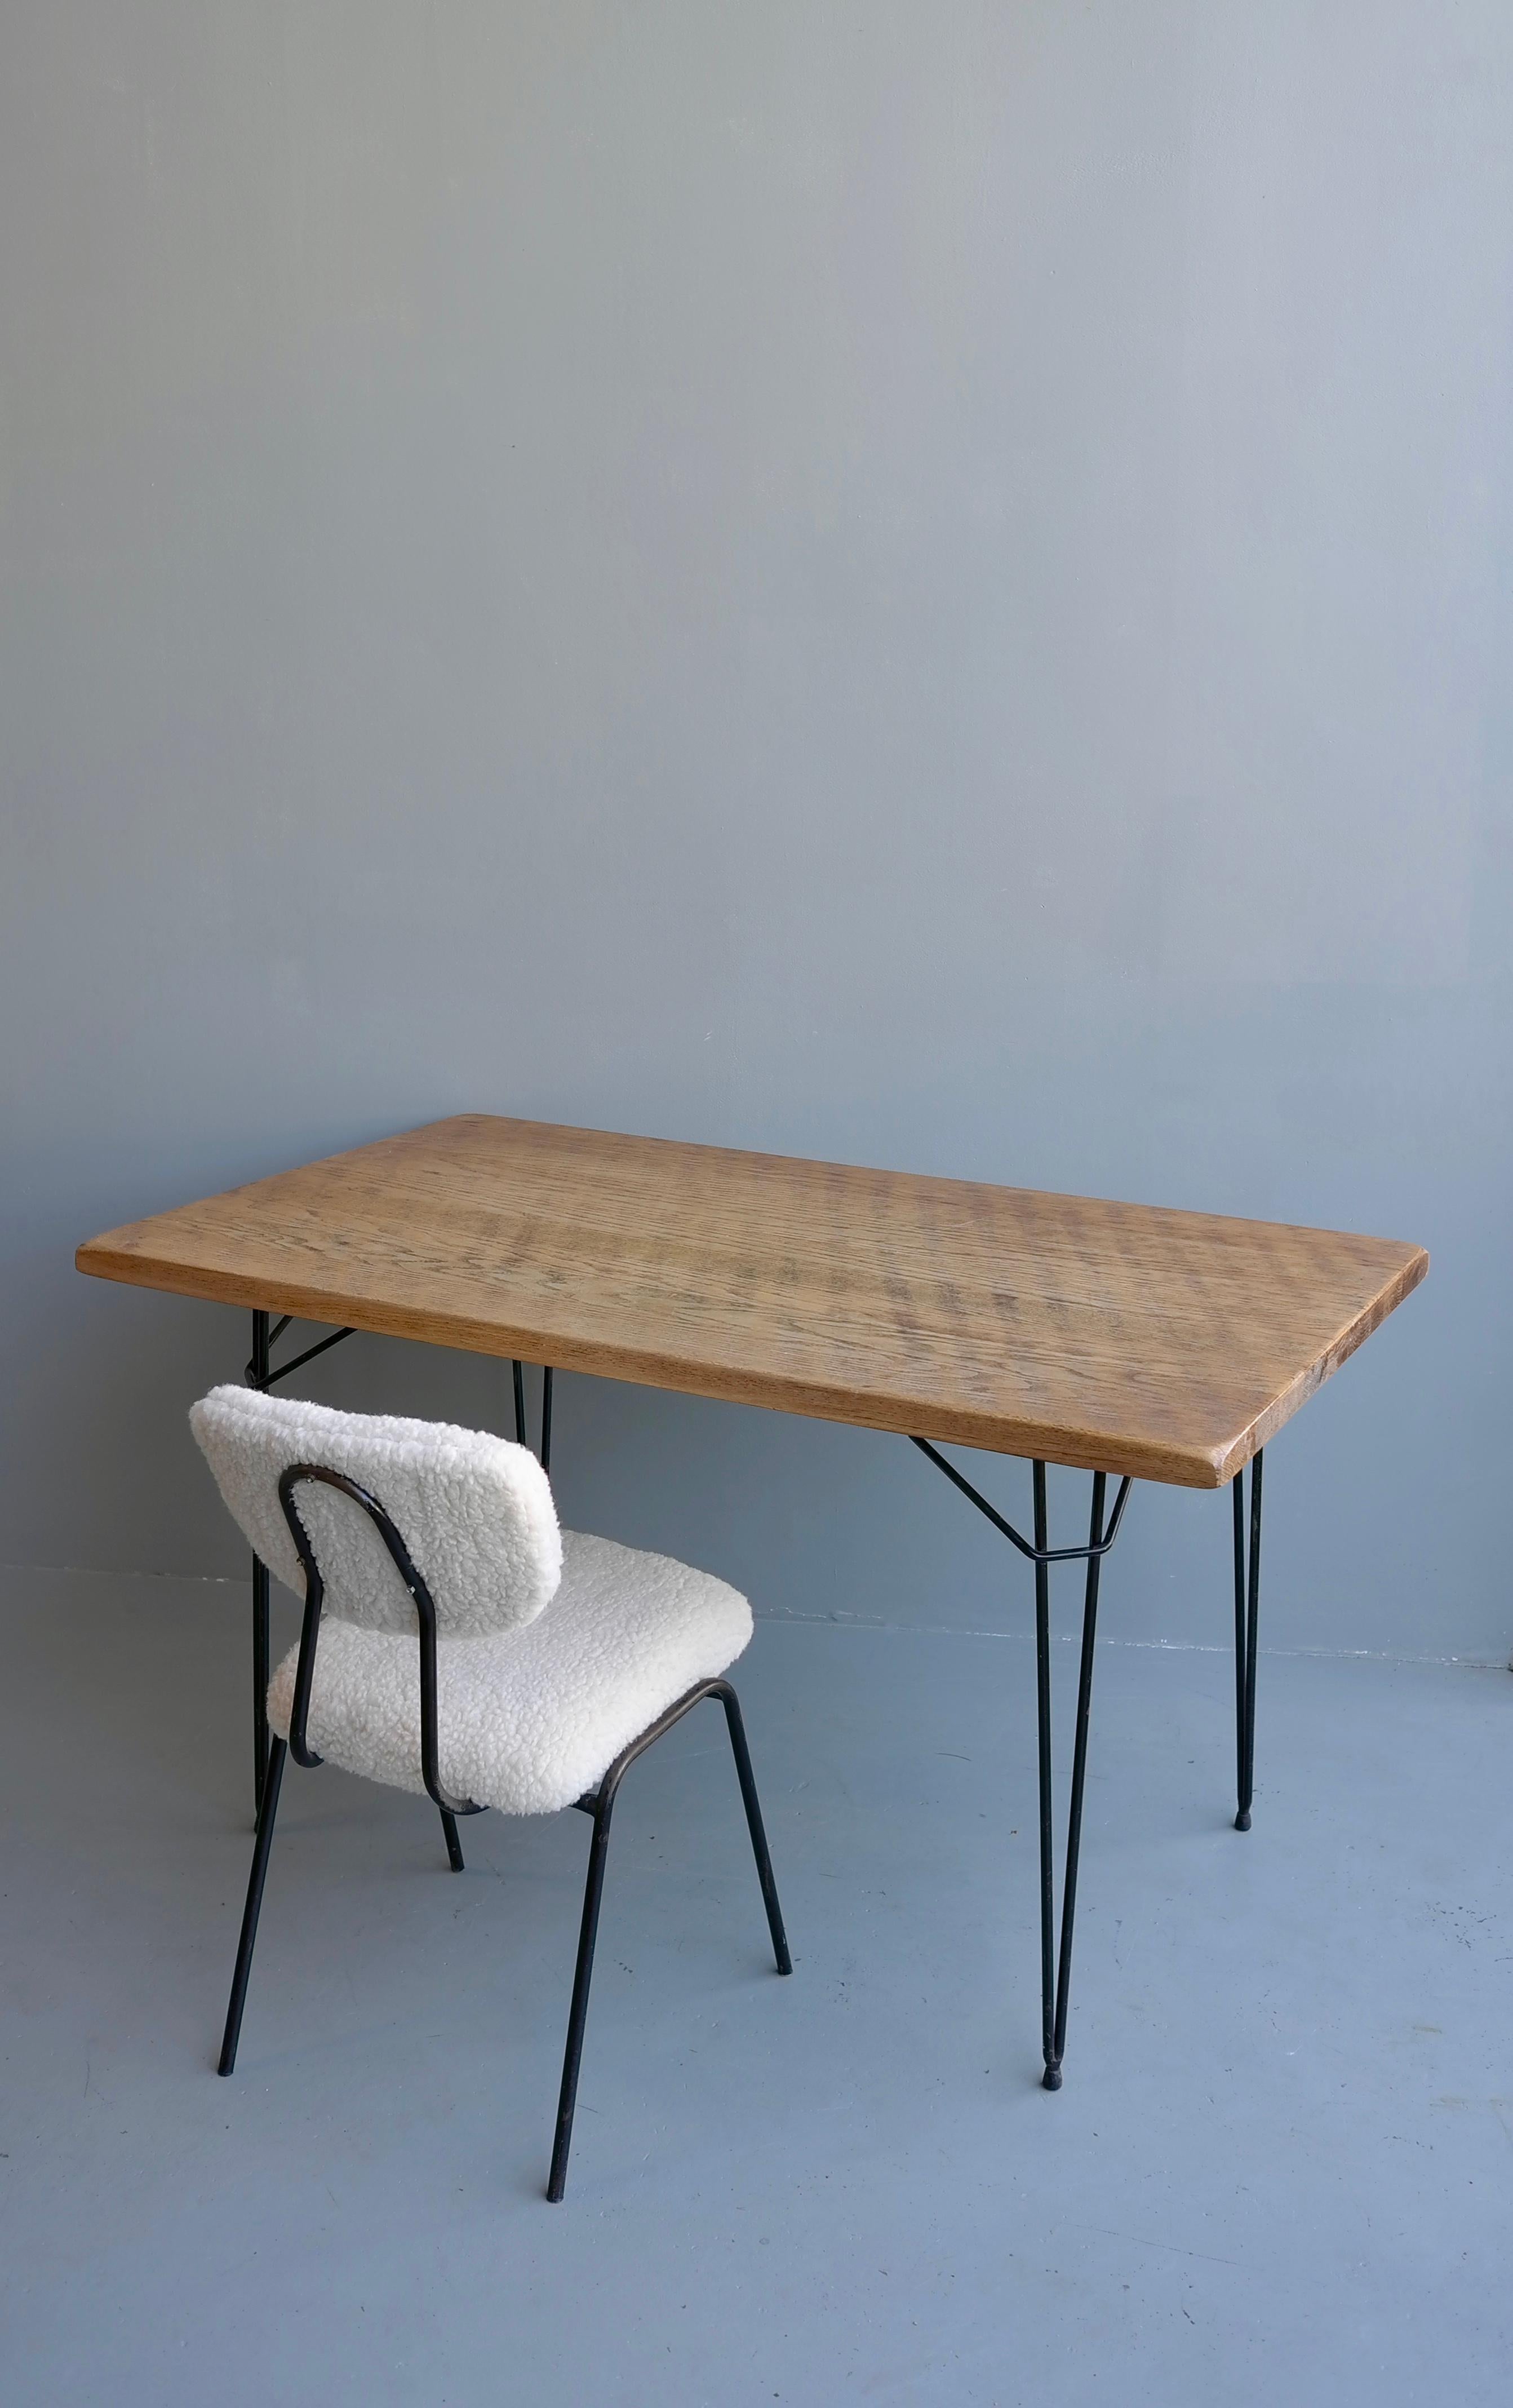 French Desk with Solid Oak Top and Hairpin Leggs, Merino Wool and Metal Chair, 1950's For Sale